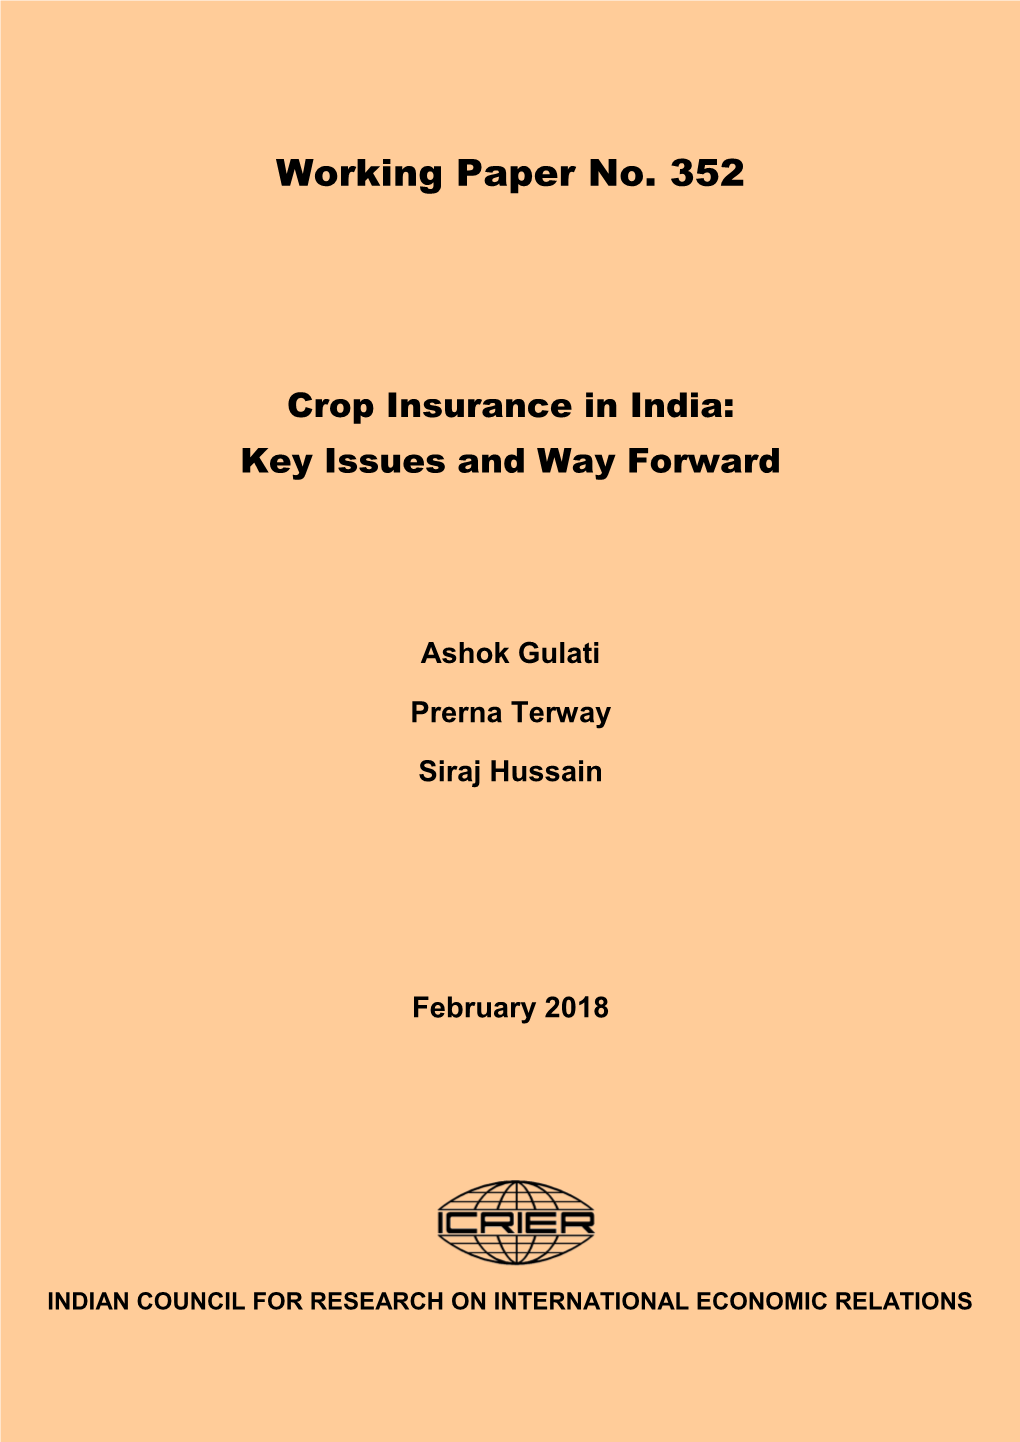 Crop Insurance in India: Key Issues and Way Forward